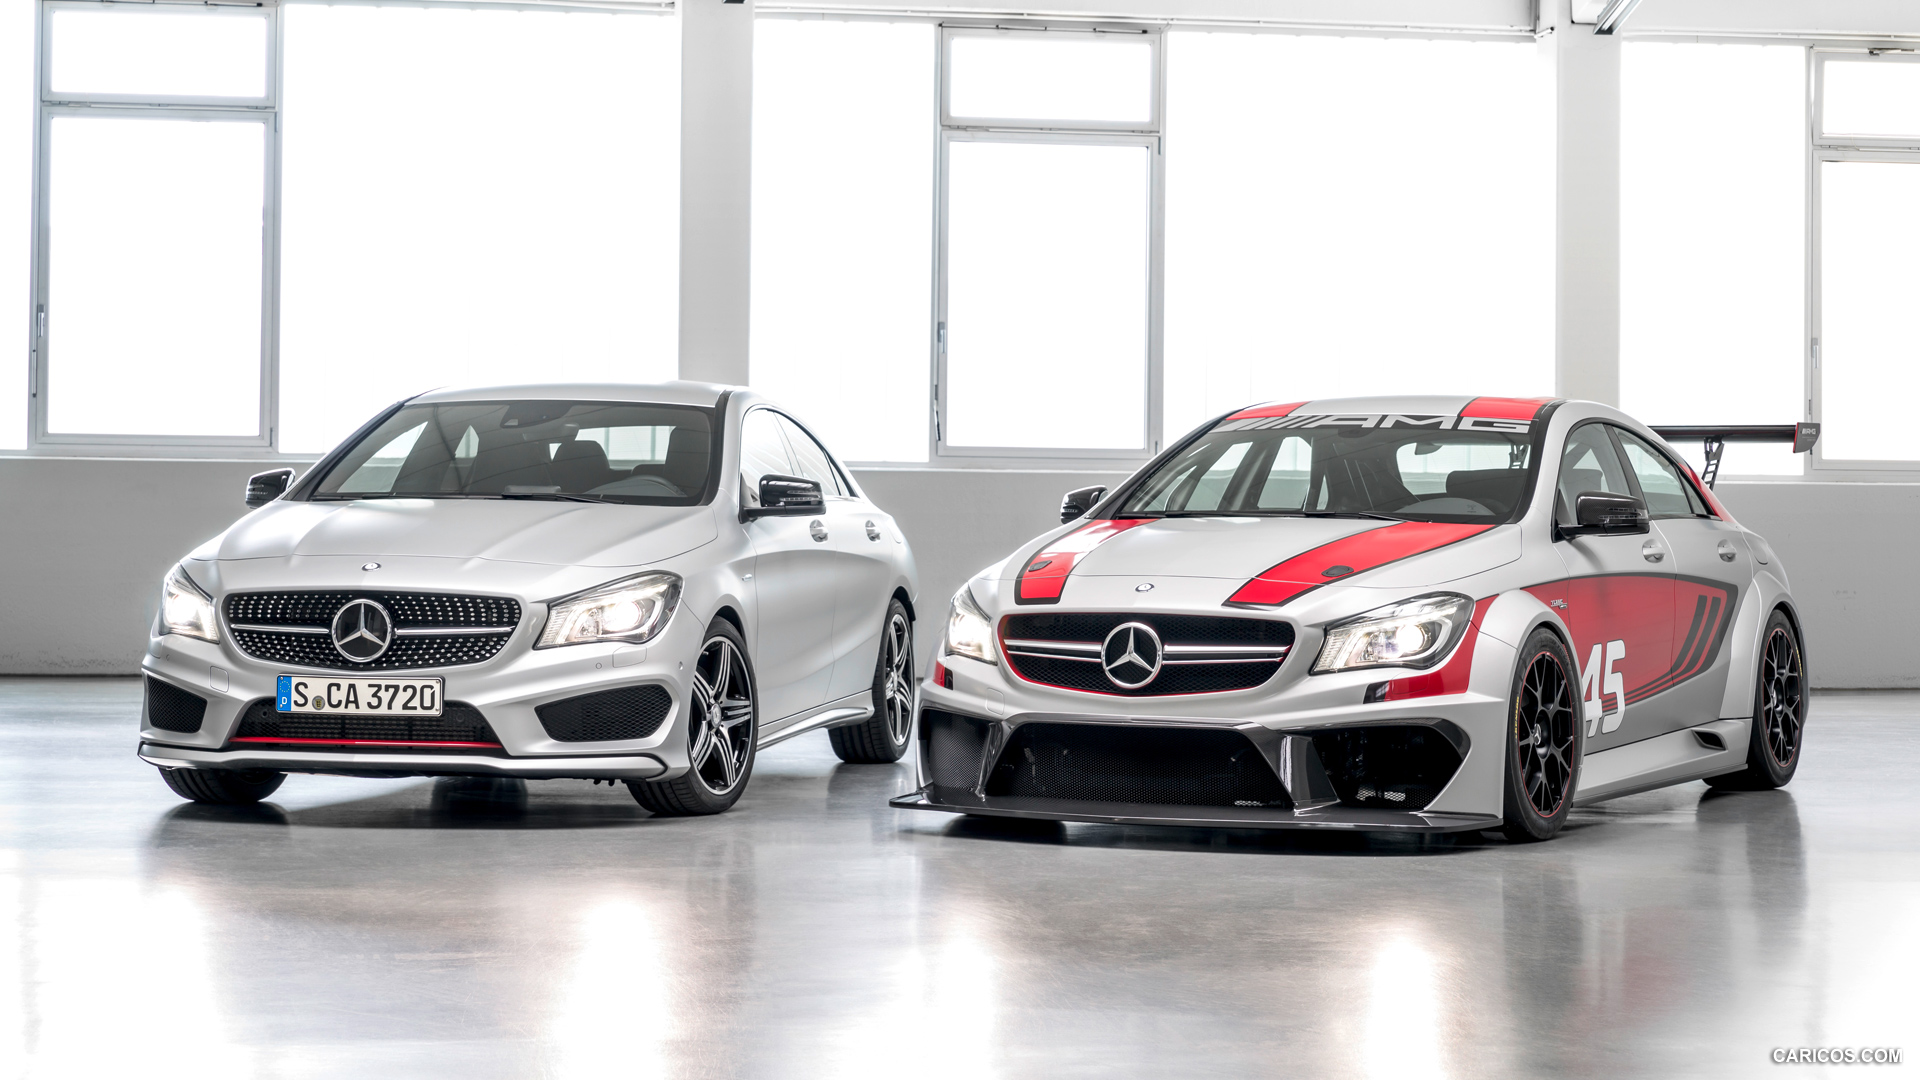 2013 Mercedes-Benz CLA 45 AMG Racing Series Concept and CLA 250 Sport - Front, #11 of 26